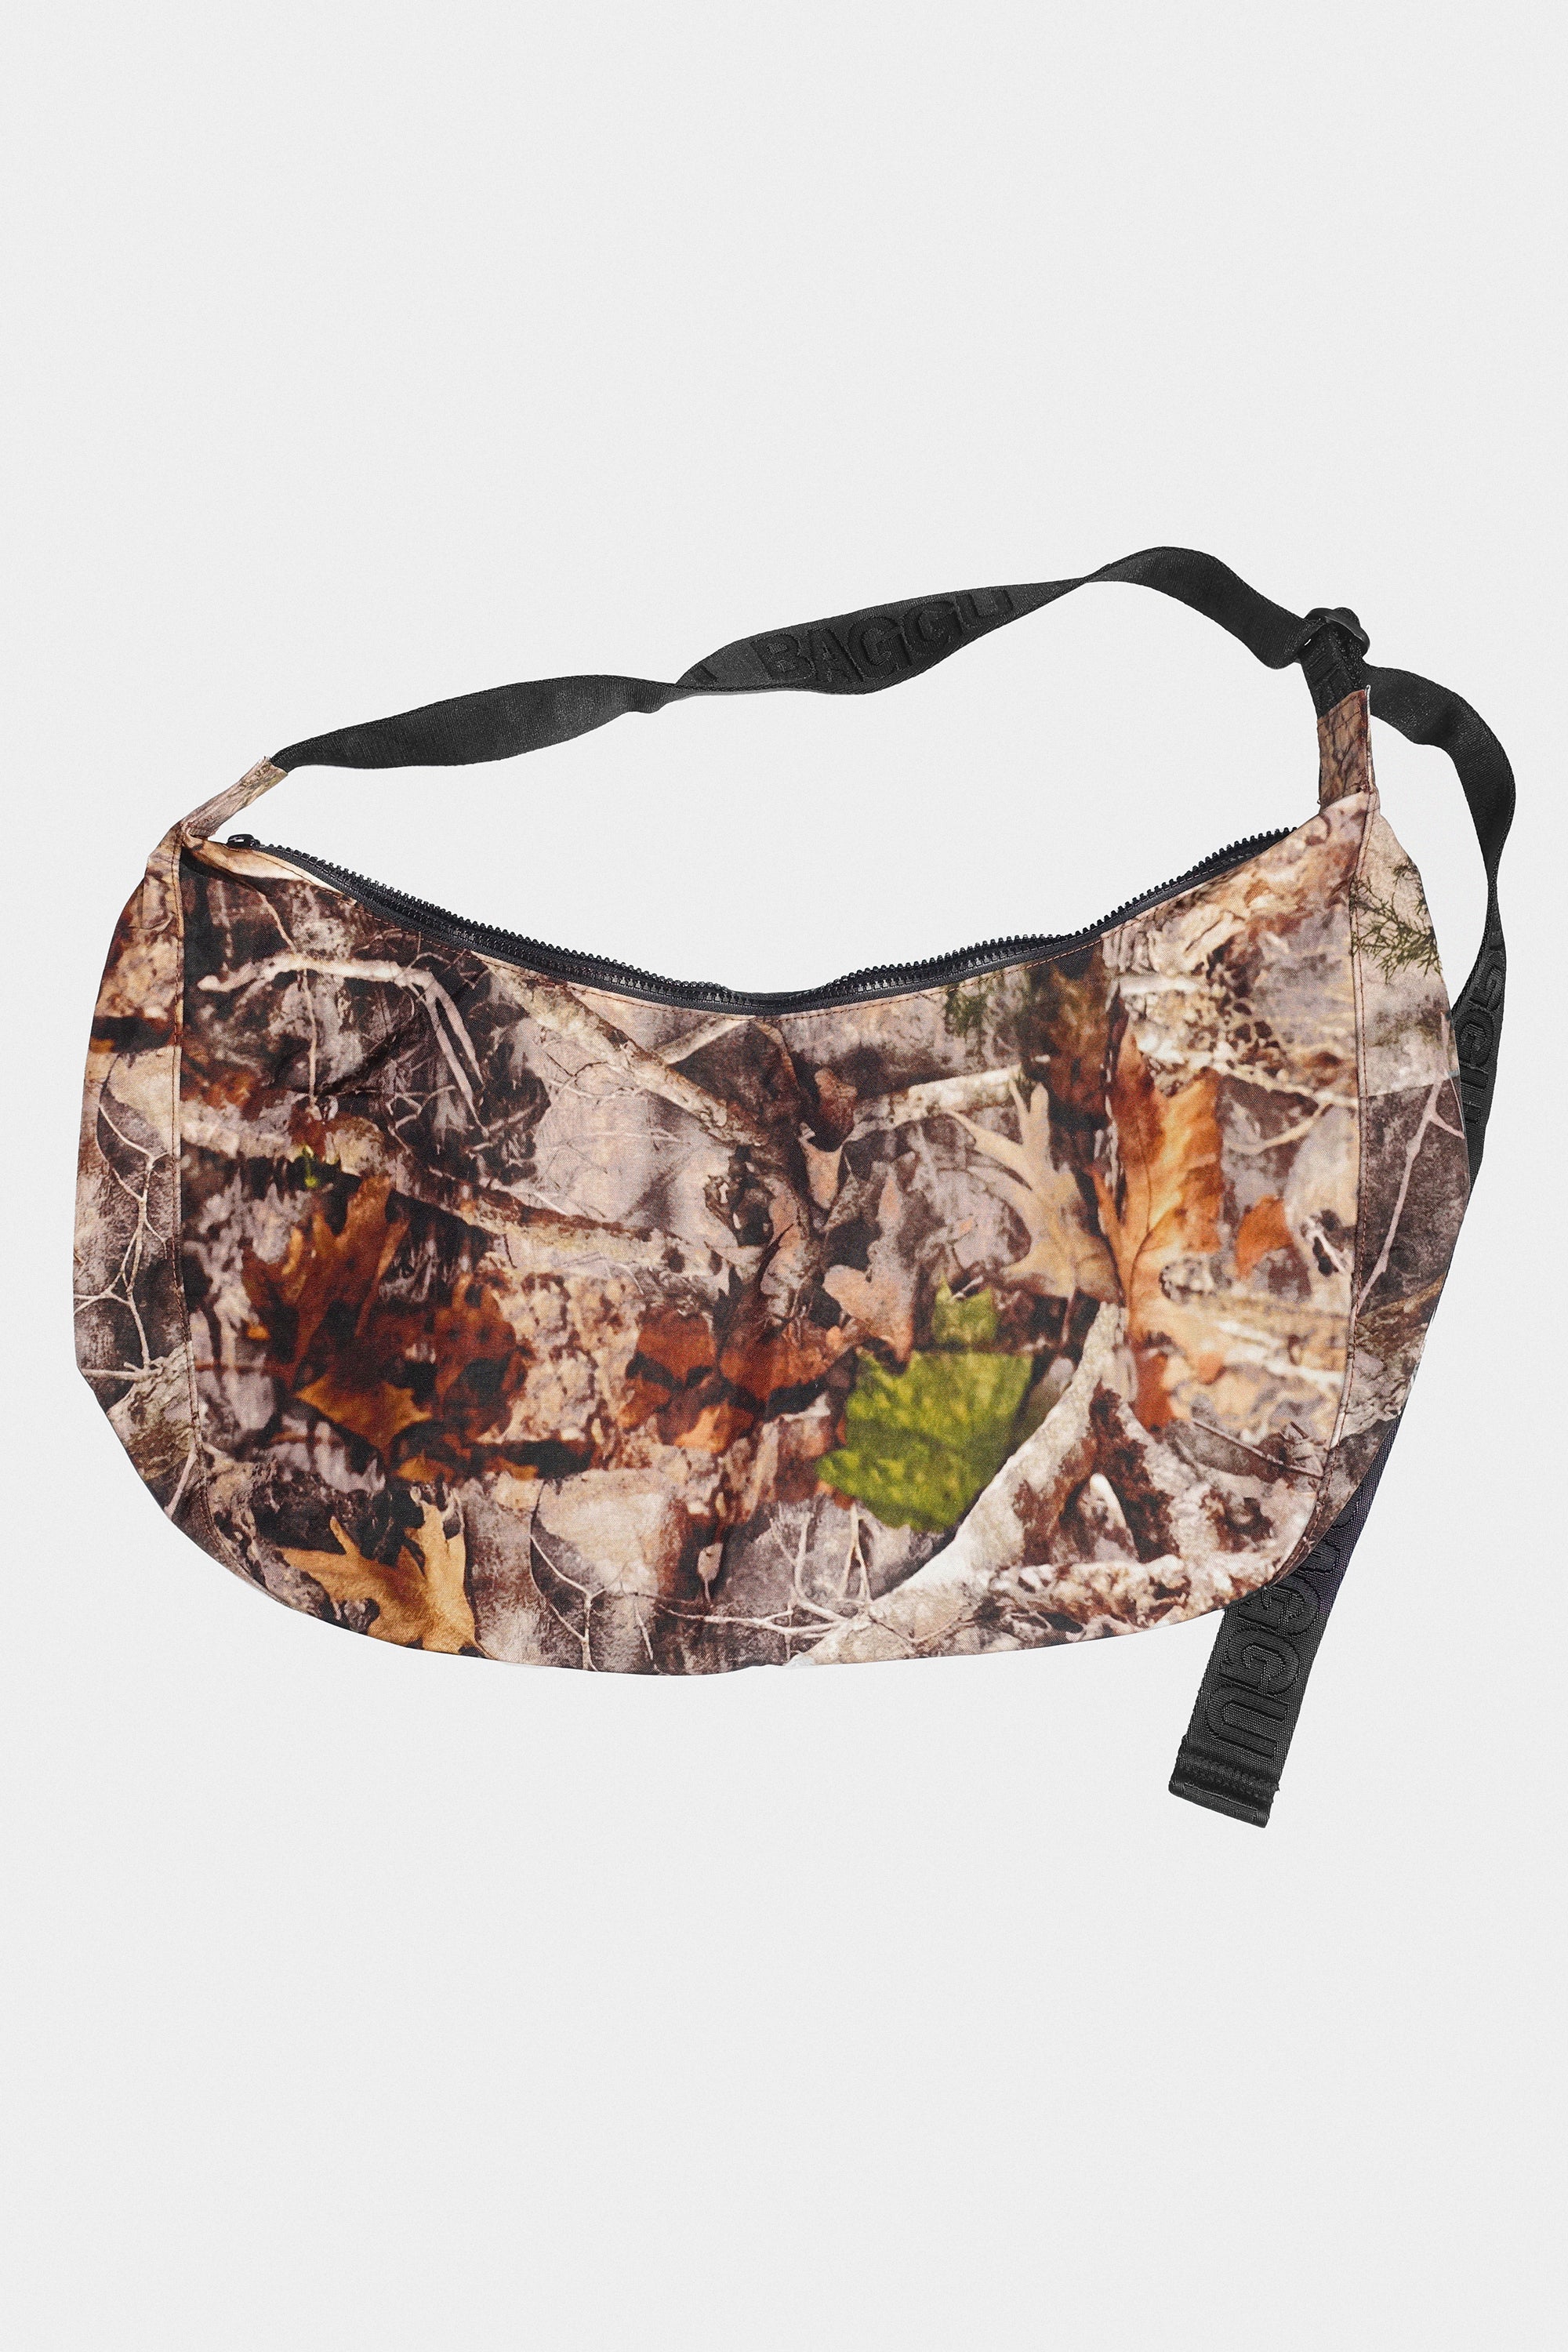 Large Nylon Crescent Bag in Photo Forest